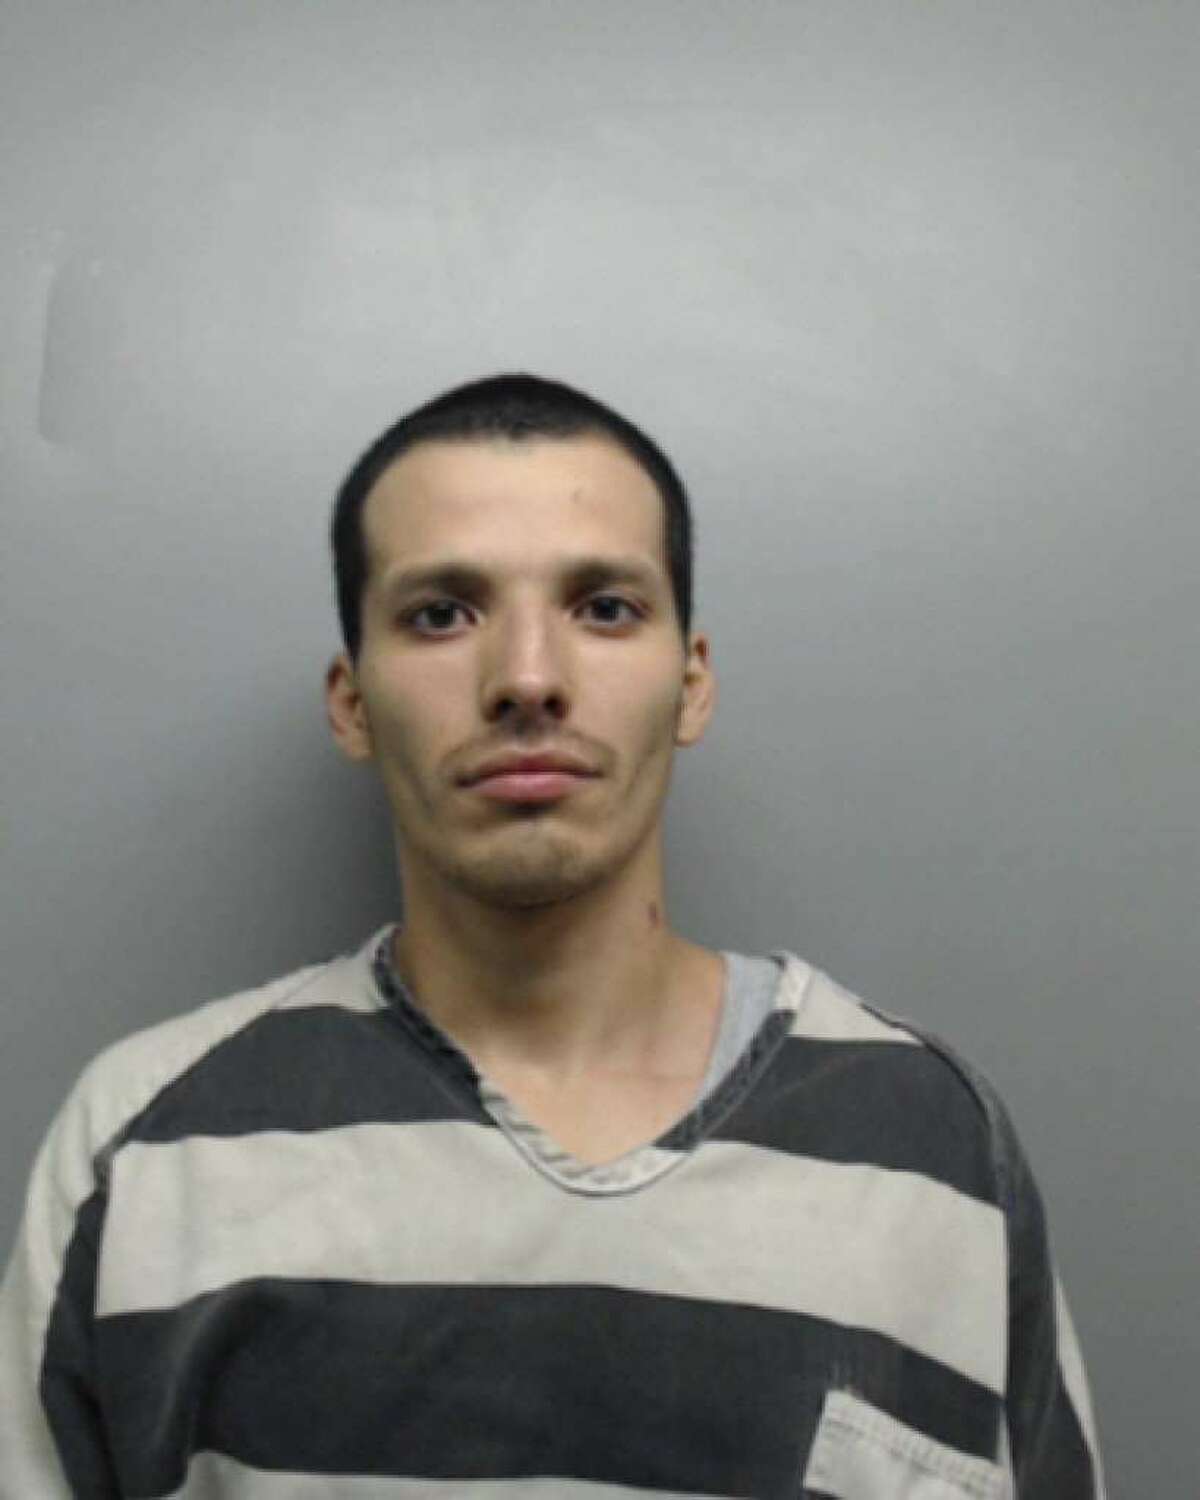 Gerardo Javier Fernandez, 27, was sentenced after pleading guilty to aggravated robbery and his participation in a Webb County Jail riot allegedly caused by Texas Mexican Mafia gang members.